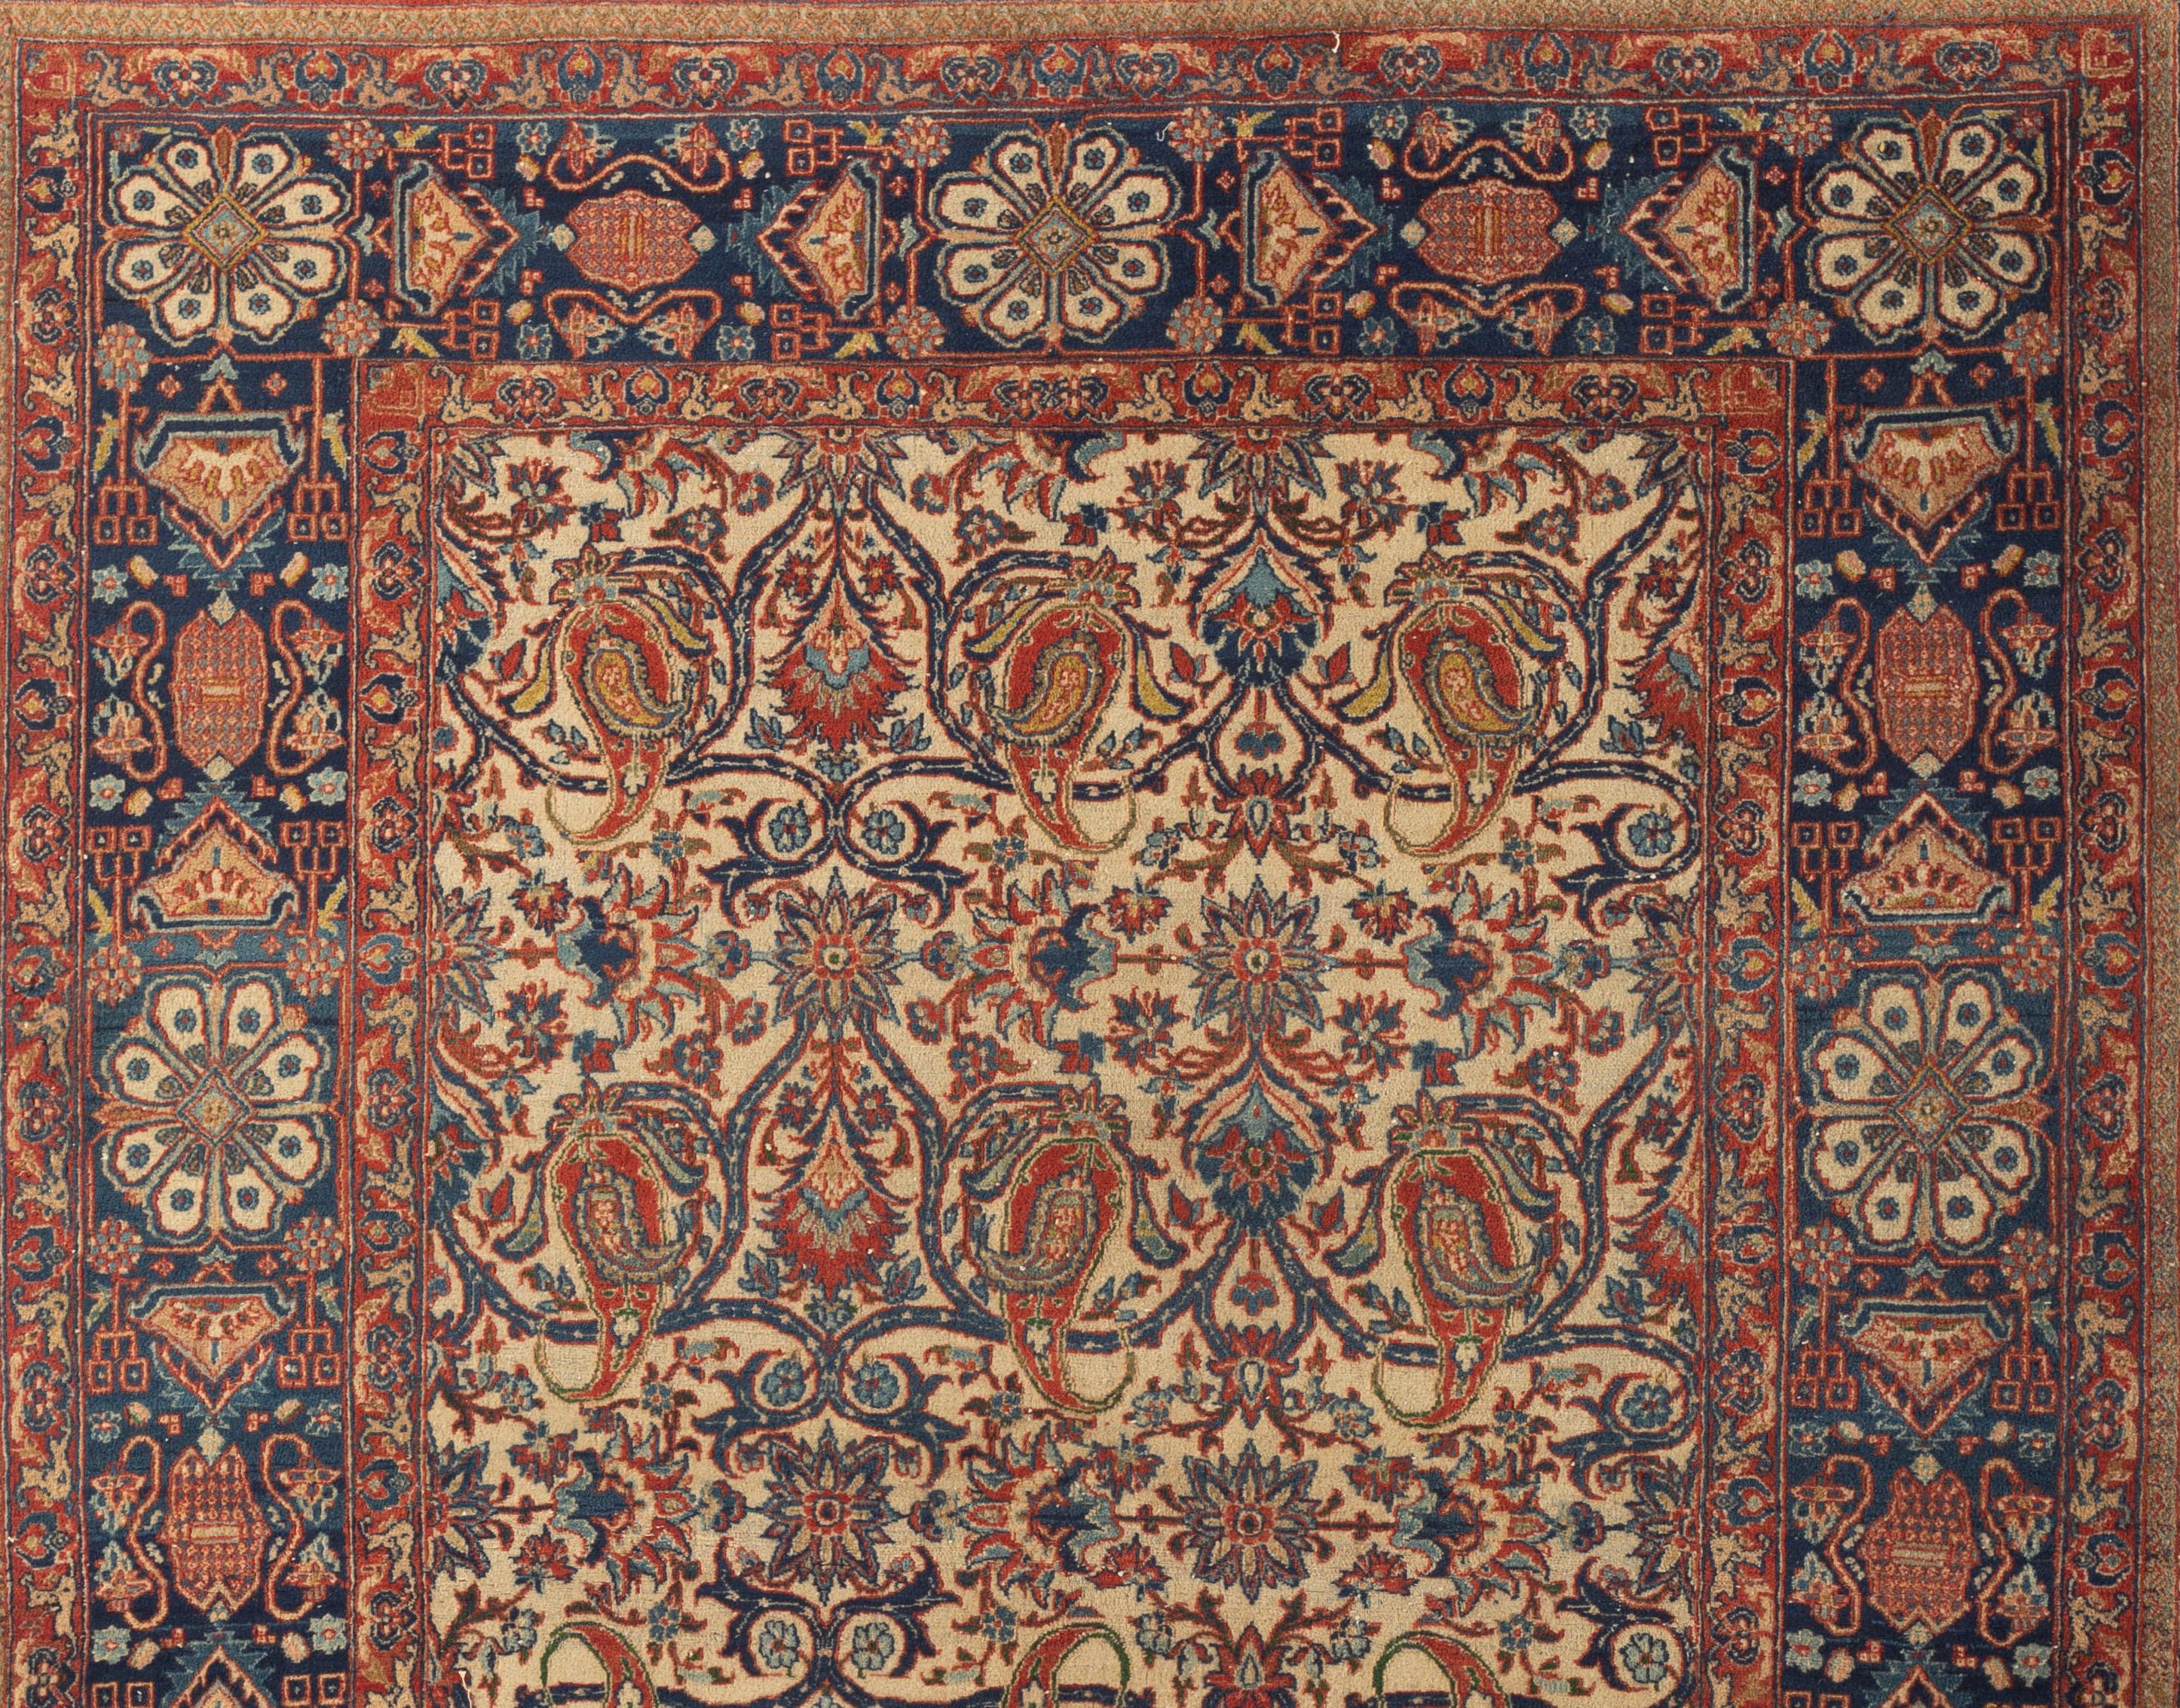 Antique Persian Isphahan rug, circa 1900. A lovely hand woven Persian Isphahan rug renowned for their superb artistry, craftsmanship, and excellent material, the open ivory field is full of detailed floral design and is so well complemented by the